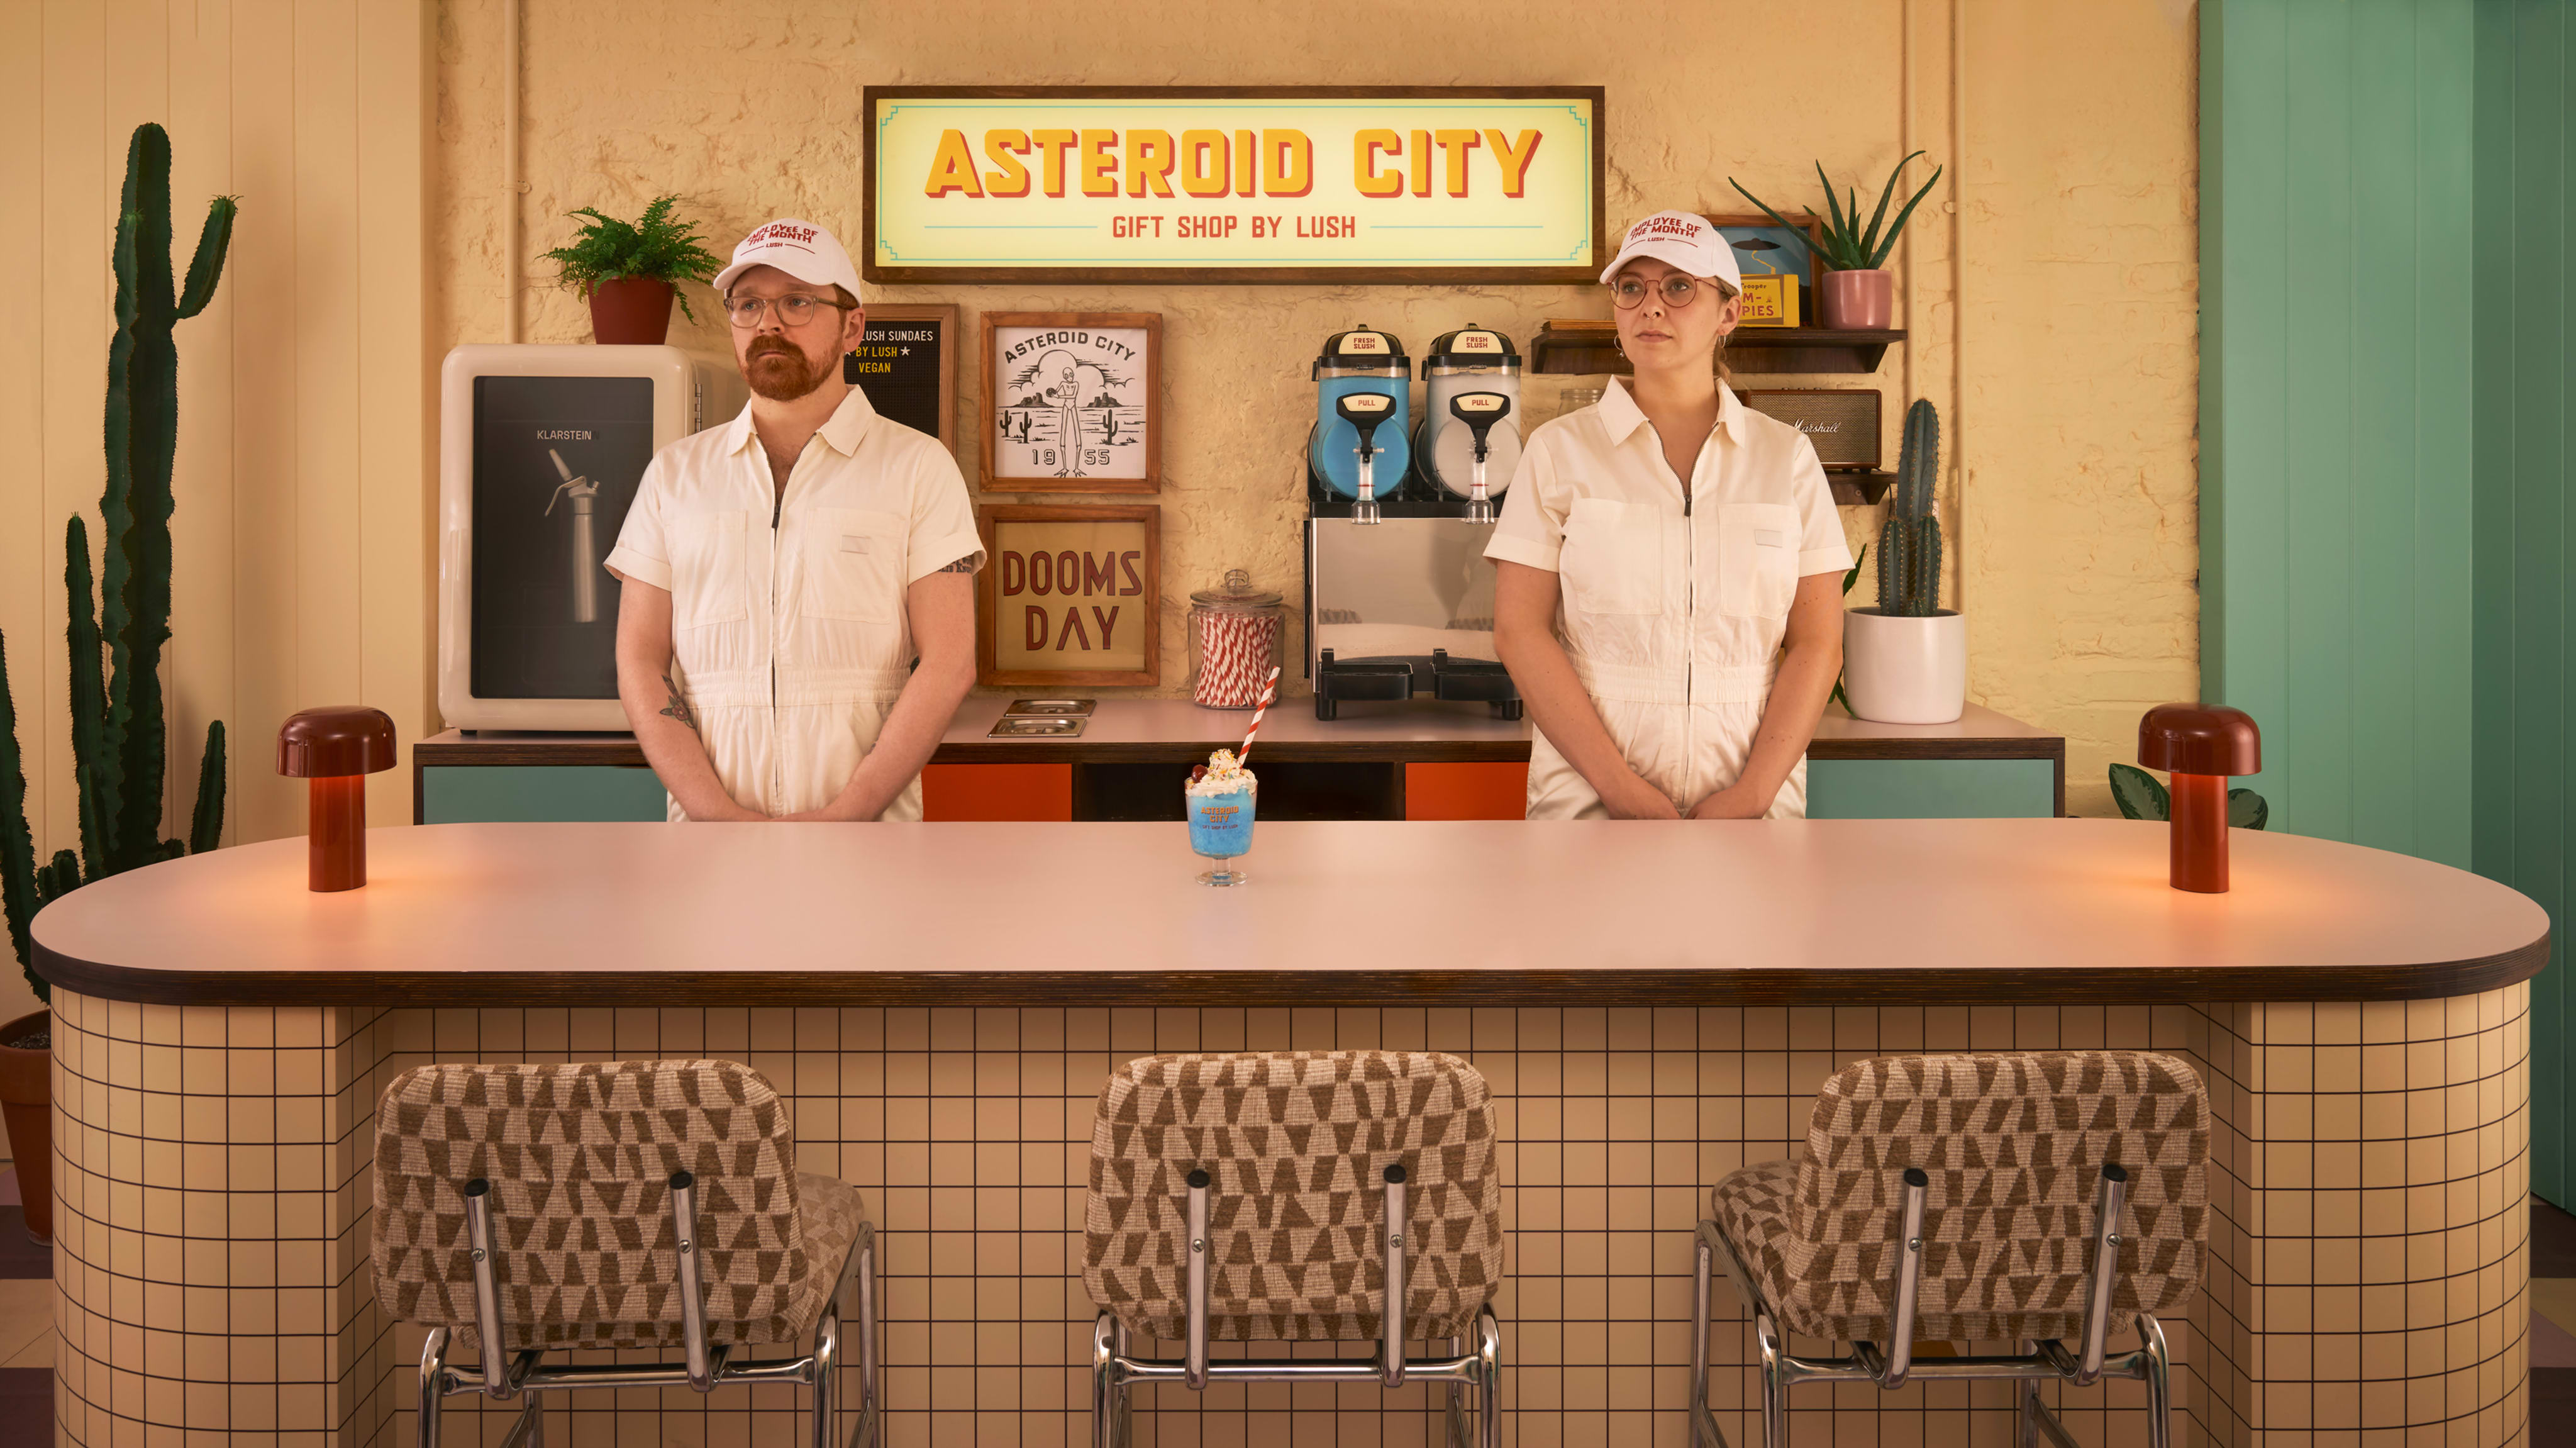 Here's how to get a free slushie at Lush X “Asteroid City” pop-up 